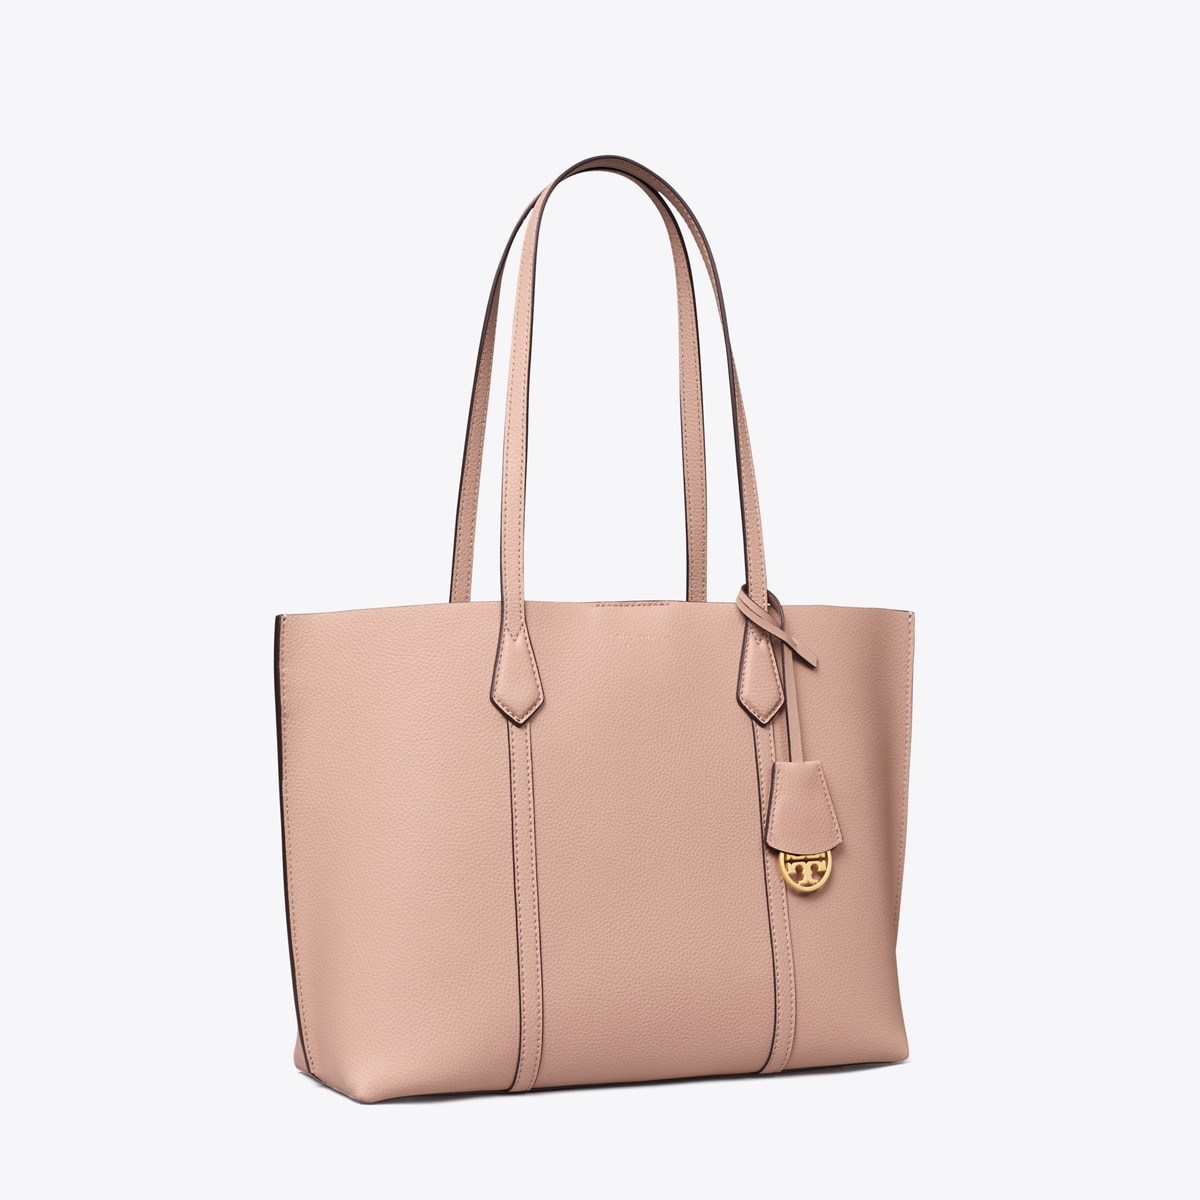 tory burch perry tote outfit